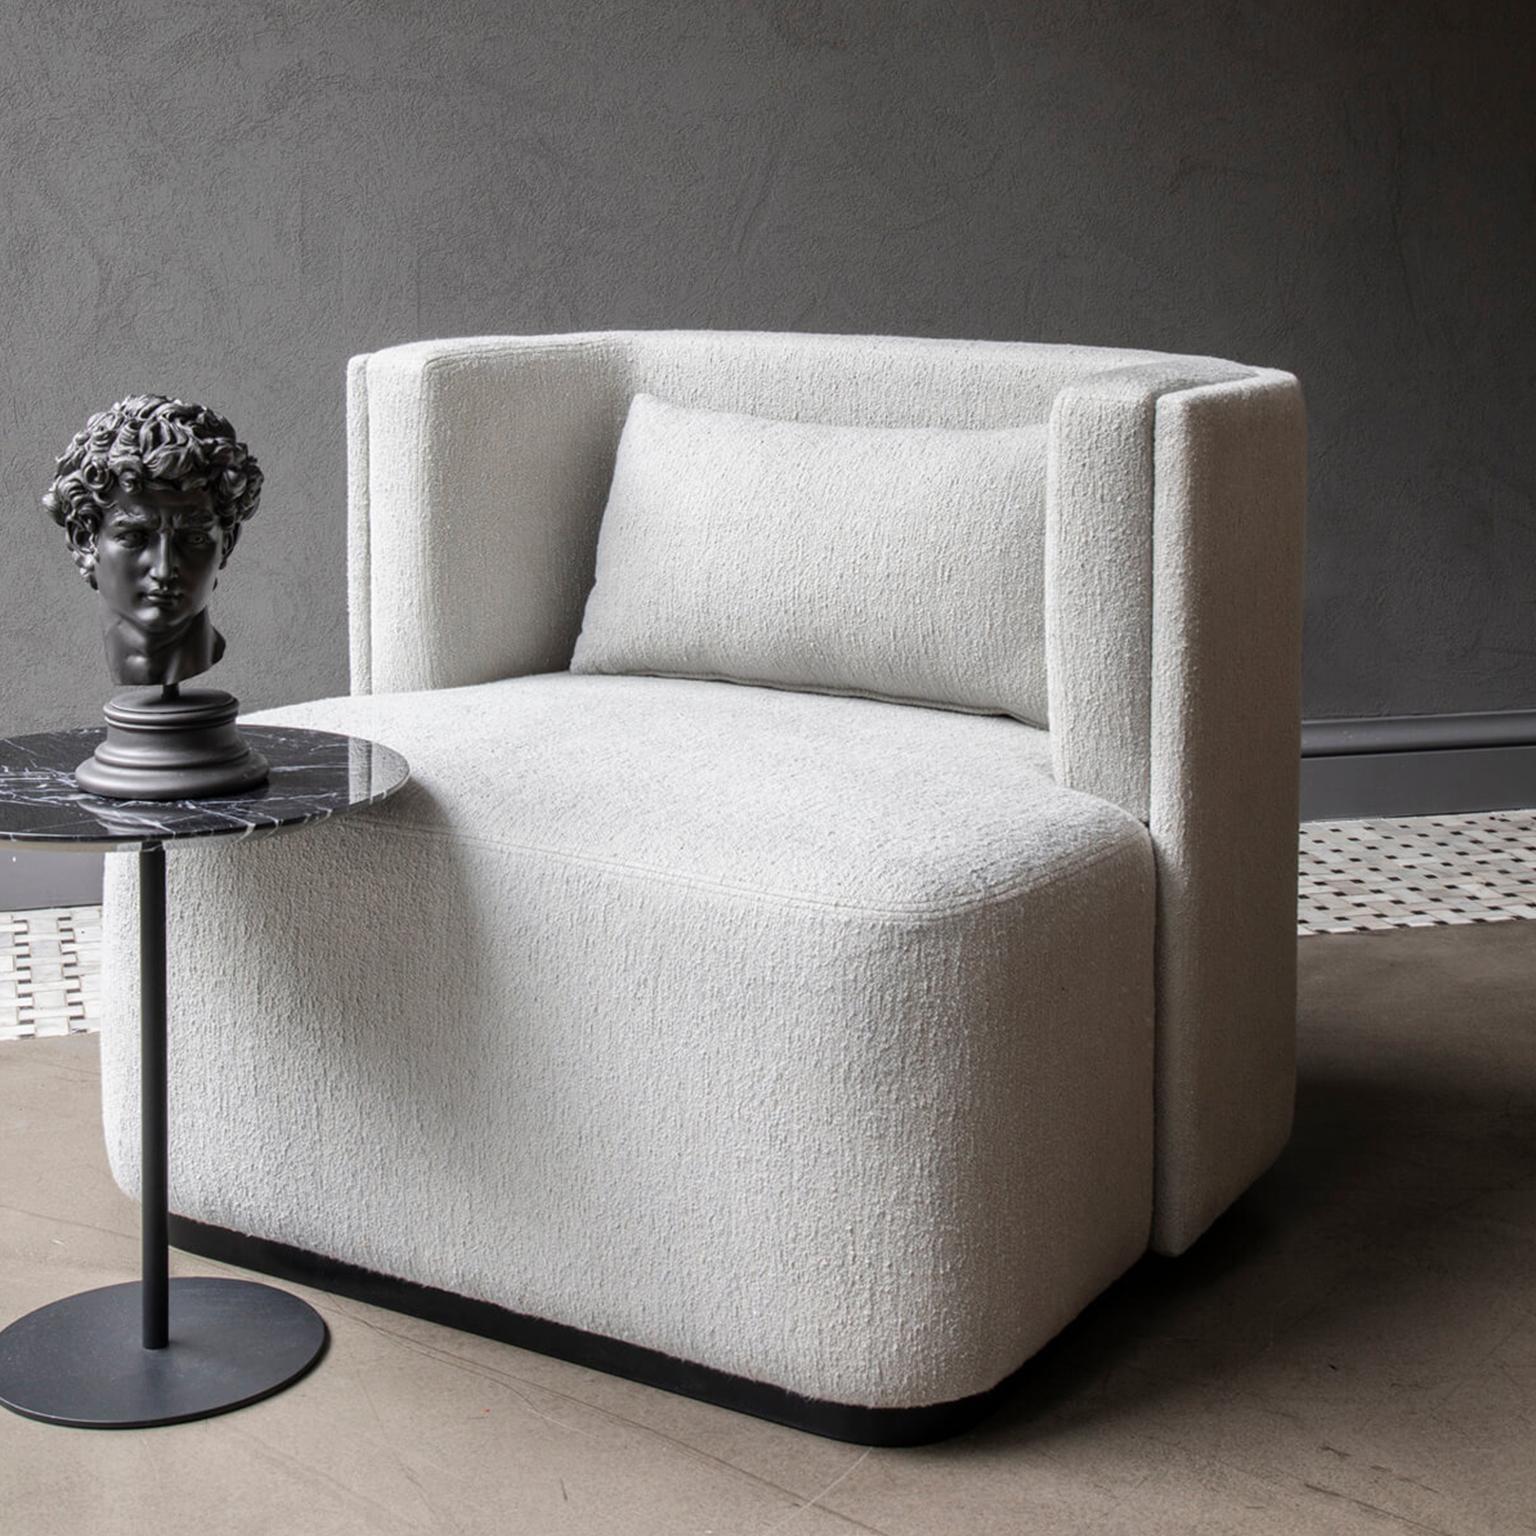 The papillonne armchair complements your style with its flawless form and unmatched comfort, adding a unique character to your space...

Measures: Length: 31.5'' / Depth: 28.4'' / Height: 28.7'' / Seat Height: 16.9''

-Spring upholstery / white